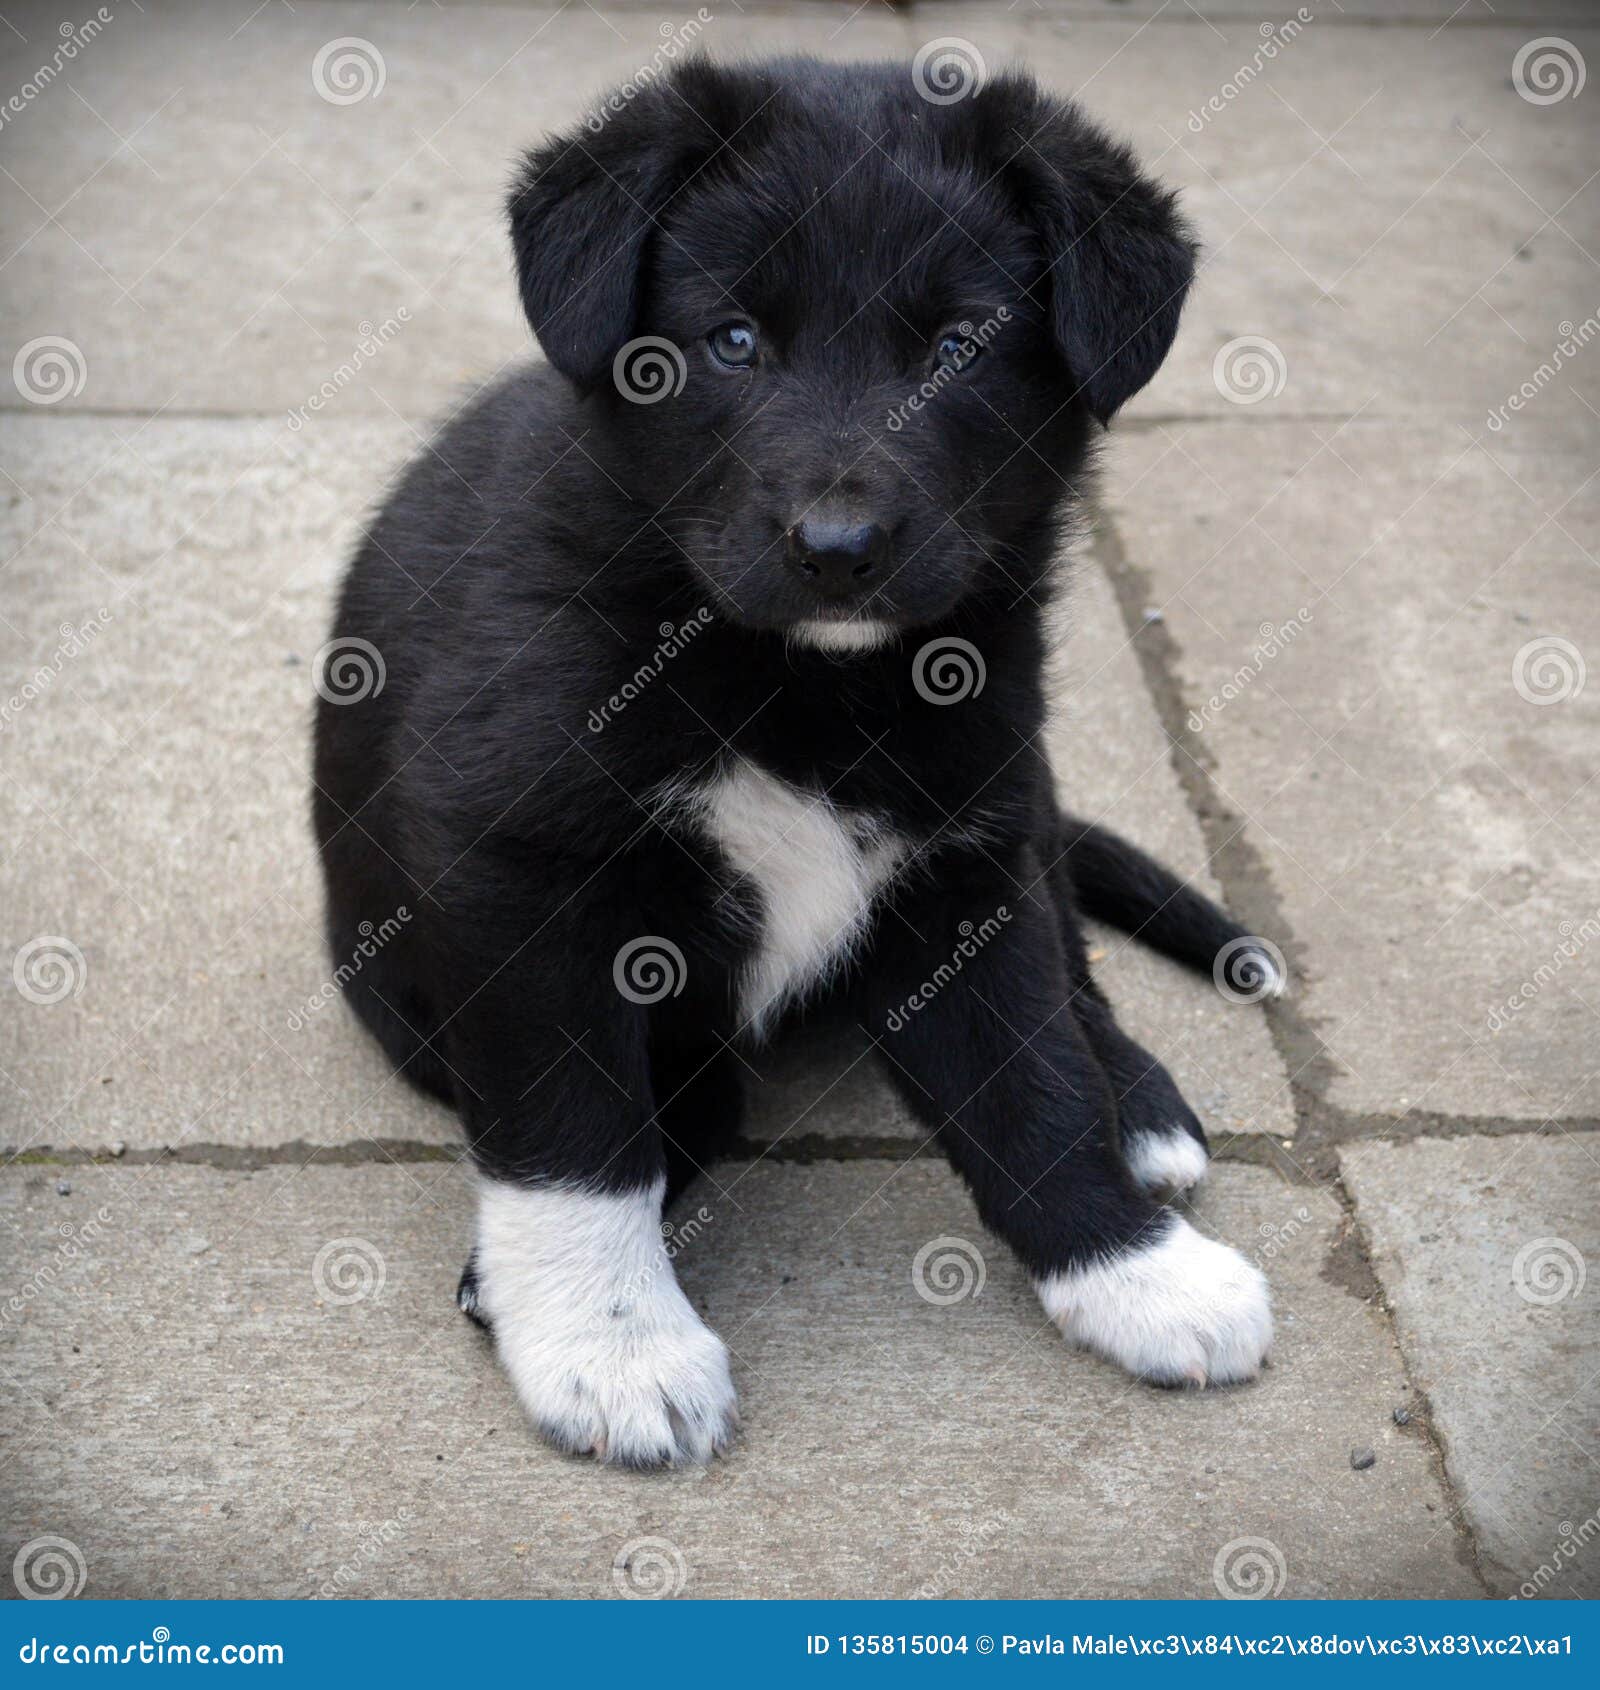 Top 94+ Images black dog with white paws and chest Superb